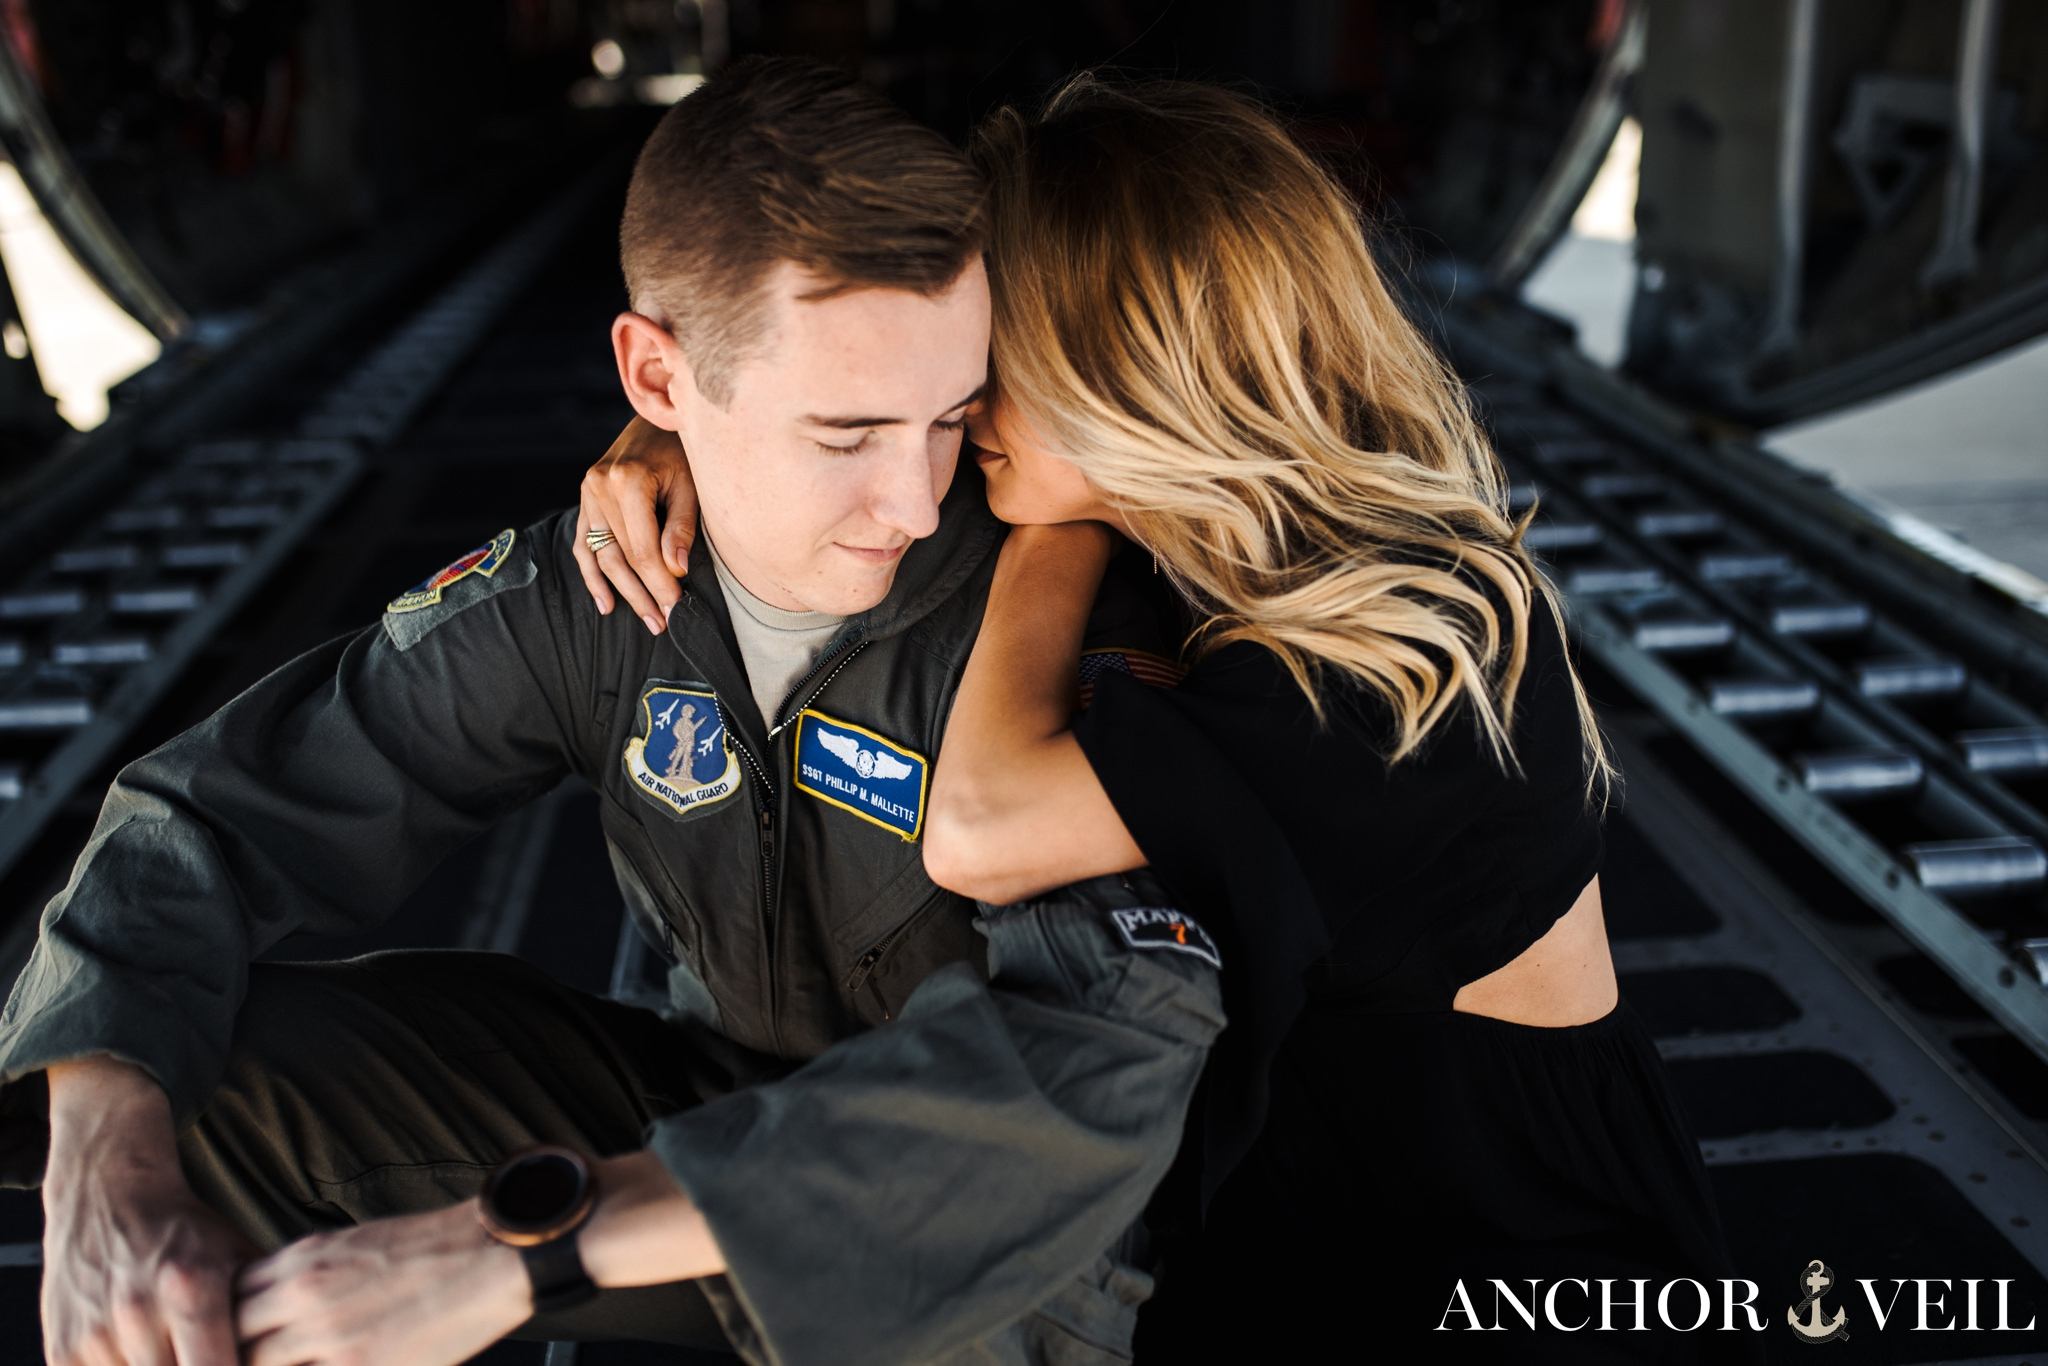 whispering in his ear during the aviation themed engagement session in Charlotte NC